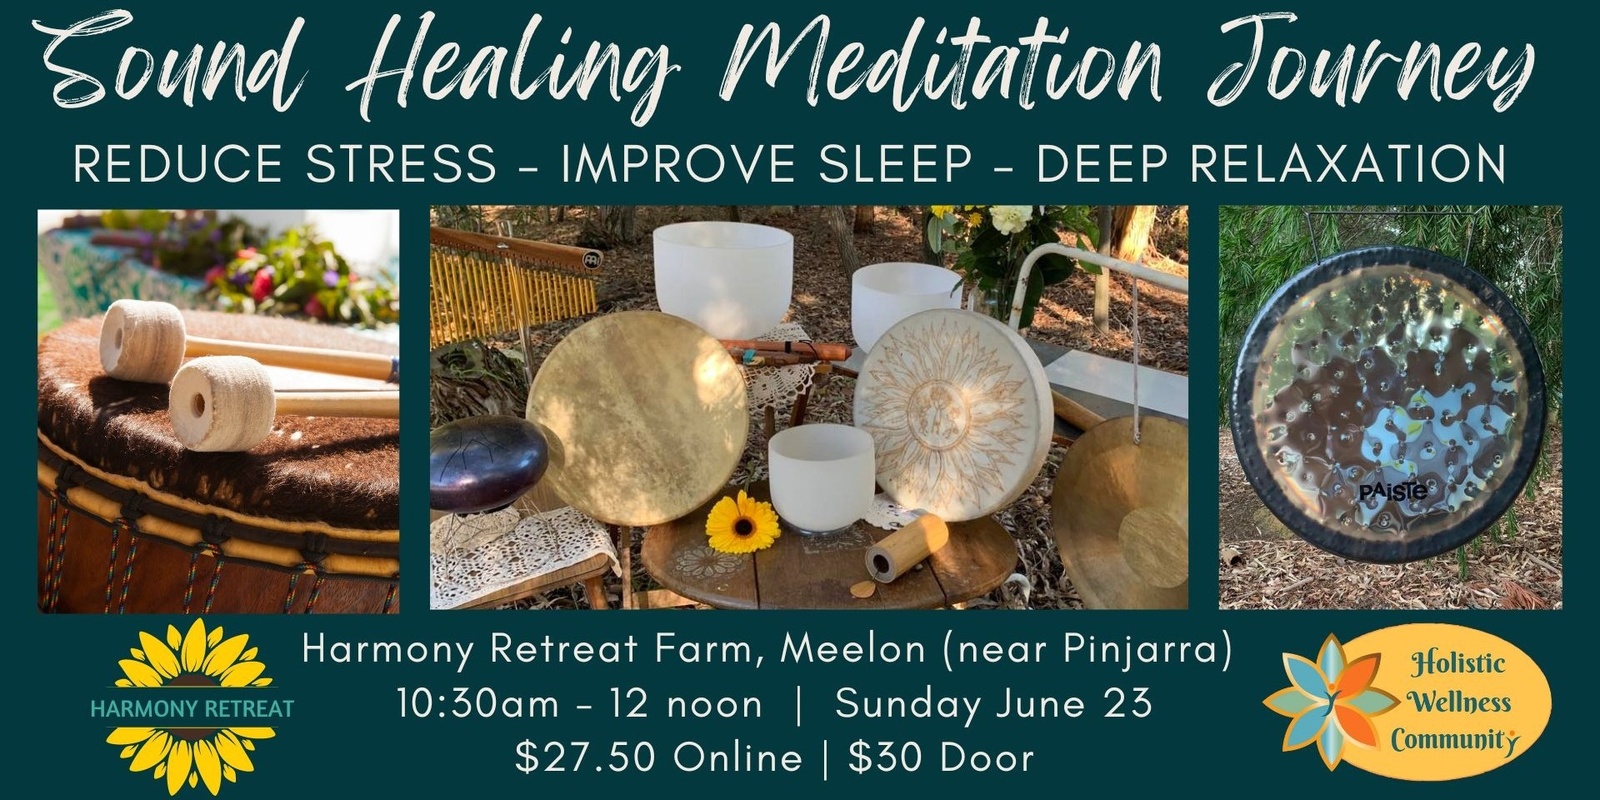 Banner image for Sound Healing Meditation Journey | At Harmony Retreat